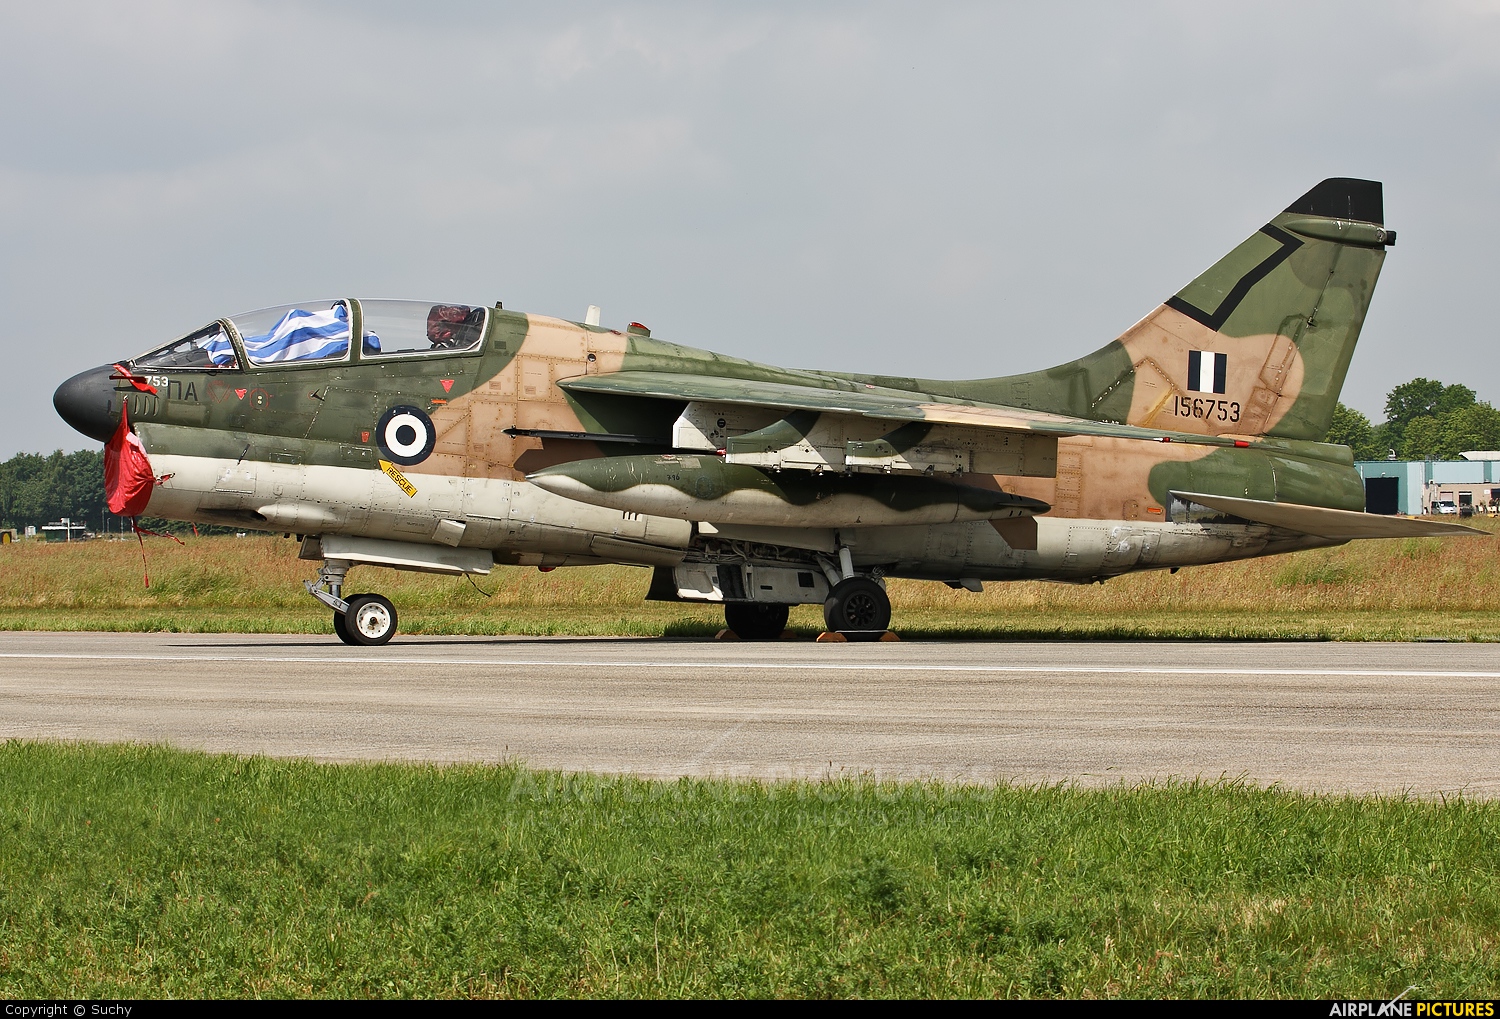 Greece - Hellenic Air Force 156753 aircraft at Uden - Volkel